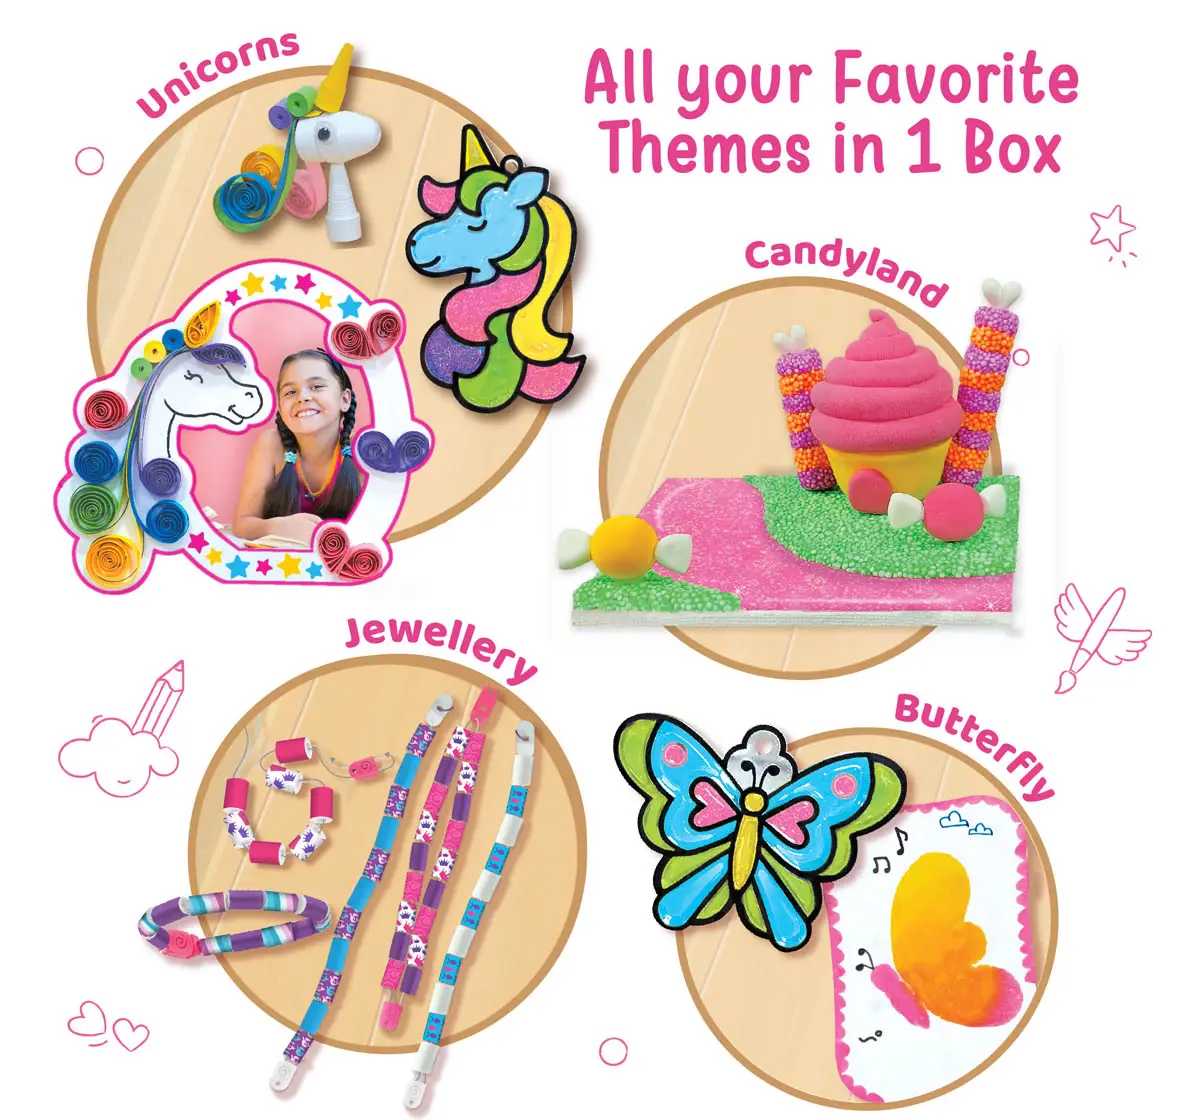 Imagimake Fabulous Craft Quilling Kit Art and Craft set for kids 5Y+, Multicolour